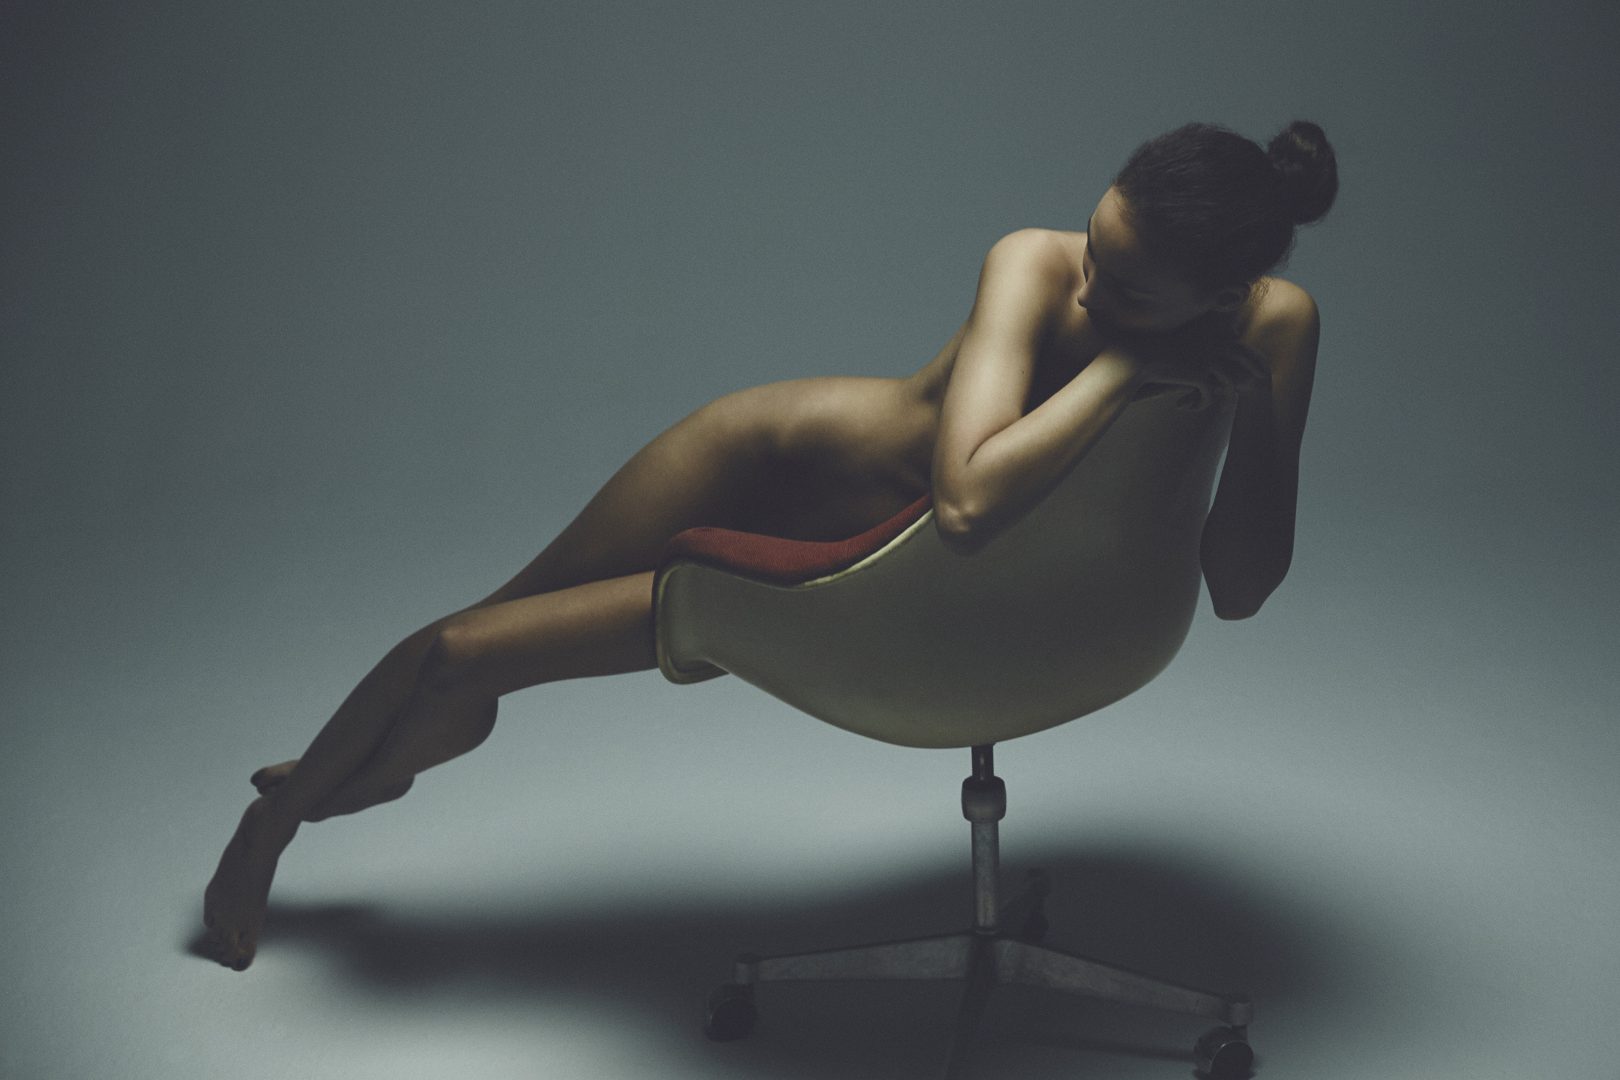 Girl sitting naked on chair by Stefan Rappo